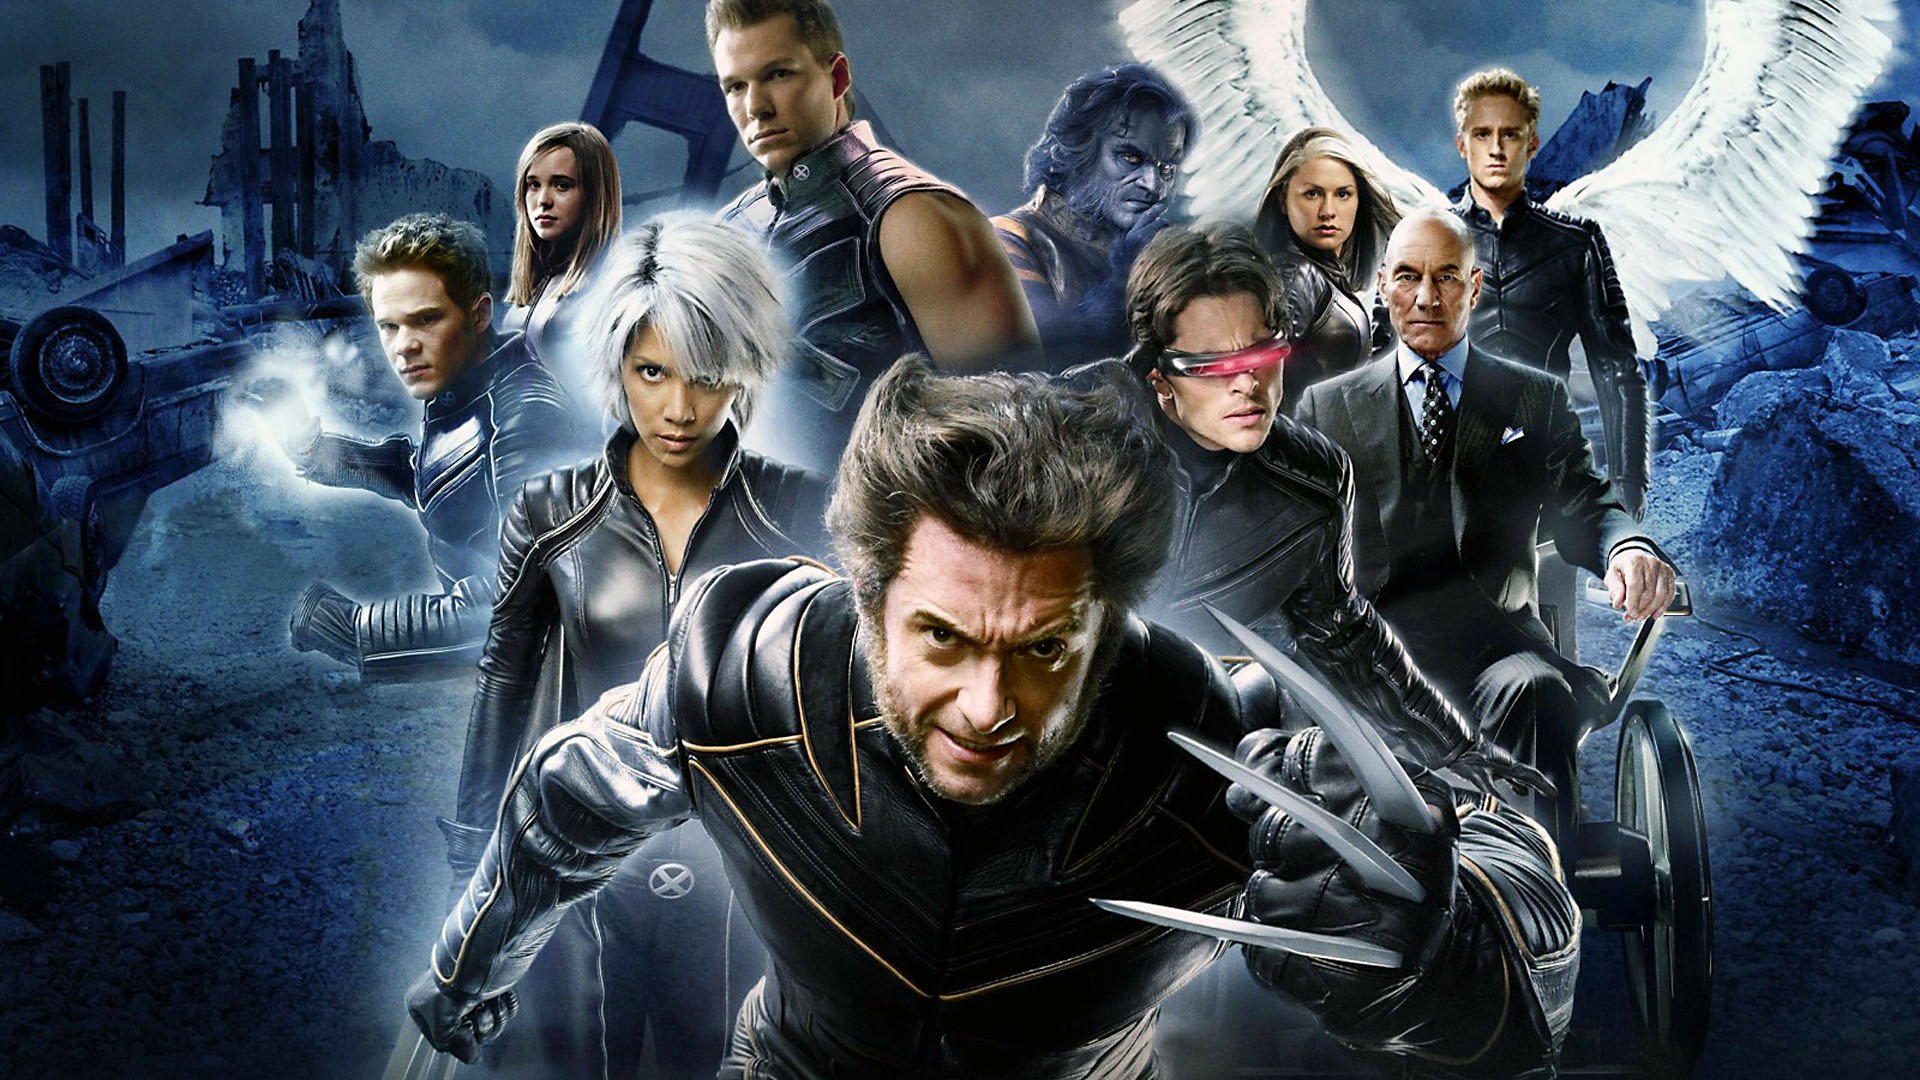 5. X-Men: The Last Stand - wide 3